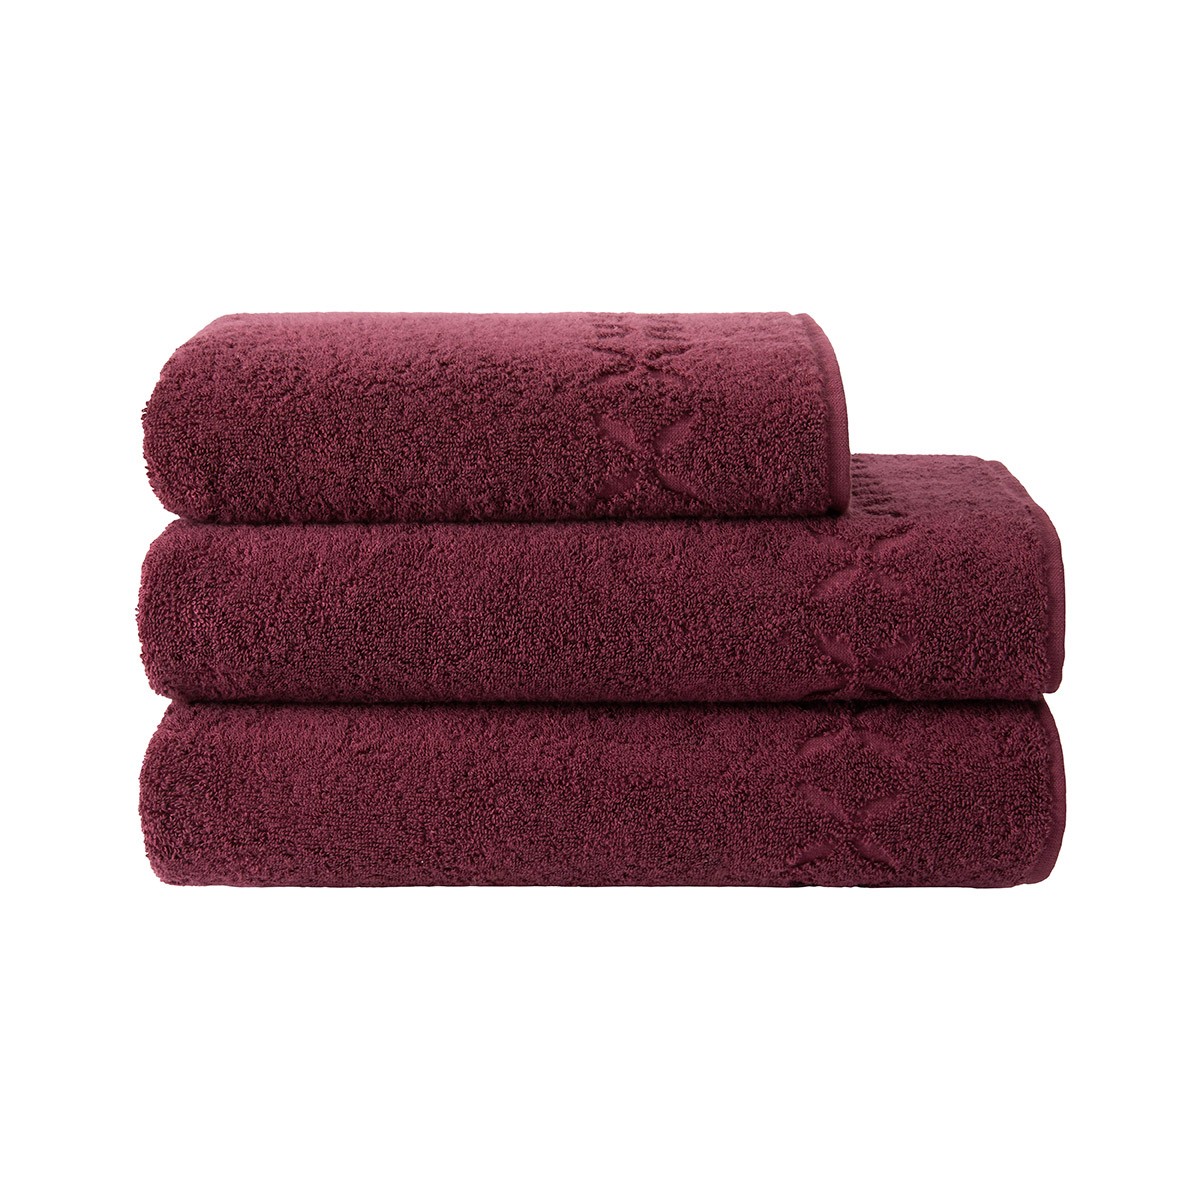 Yves Delorme Bath  Luxury Towels and Accessories